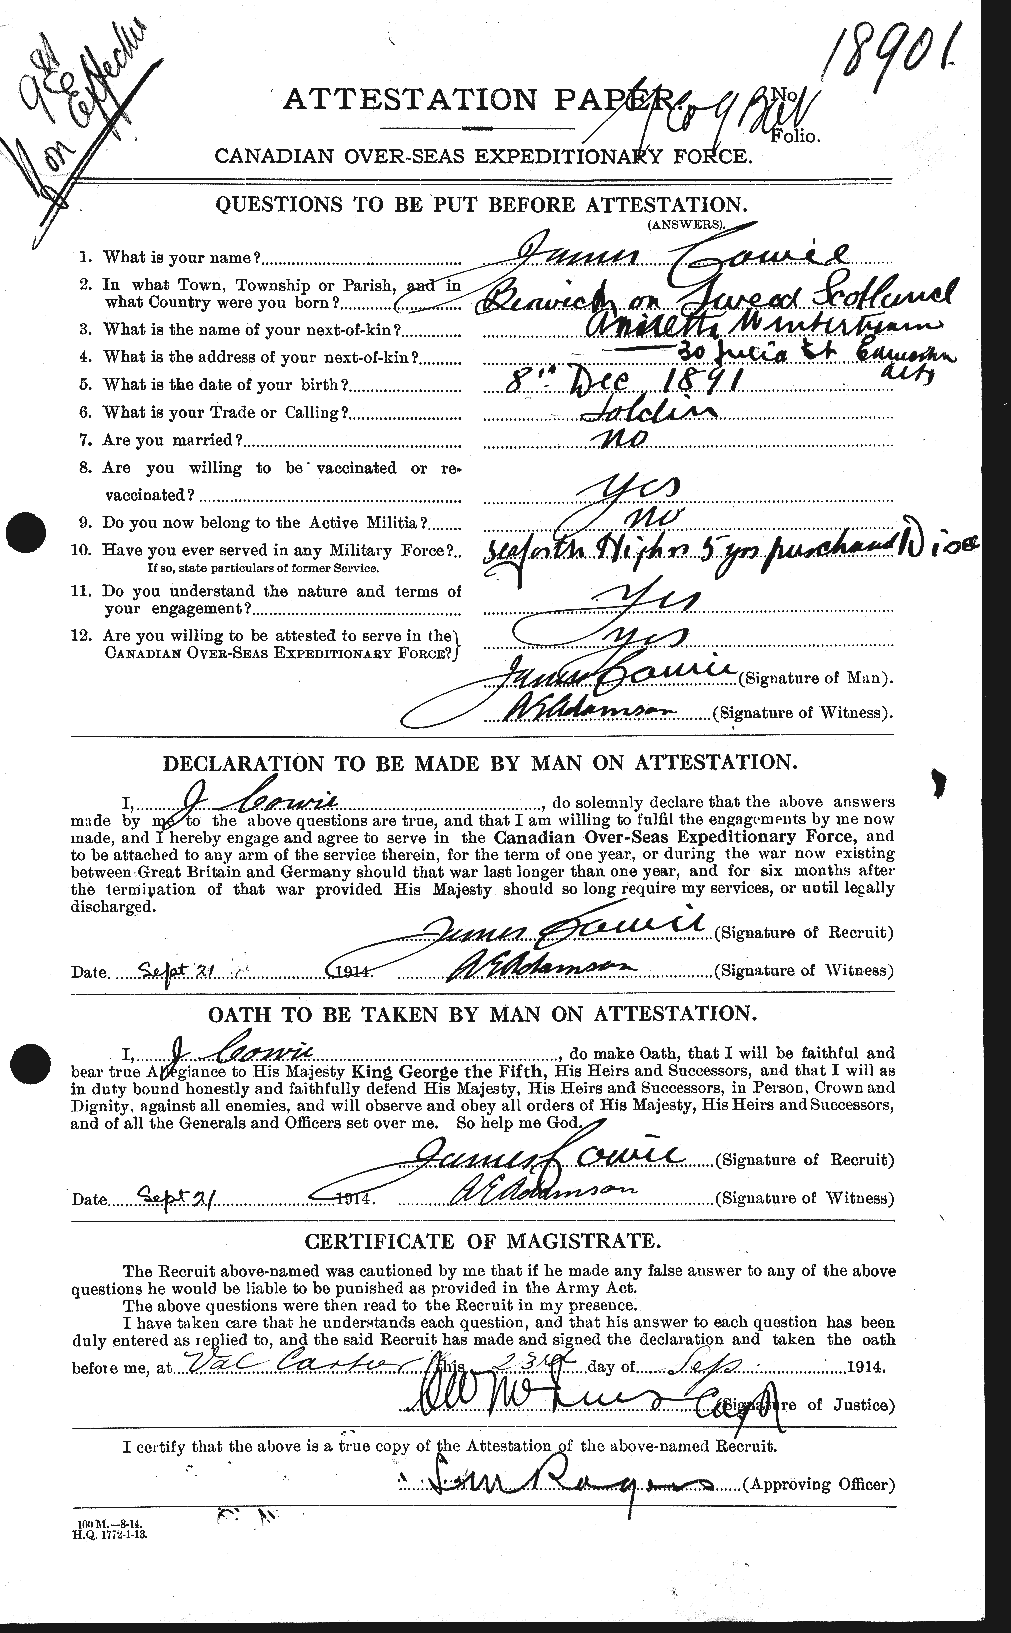 Personnel Records of the First World War - CEF 060013a